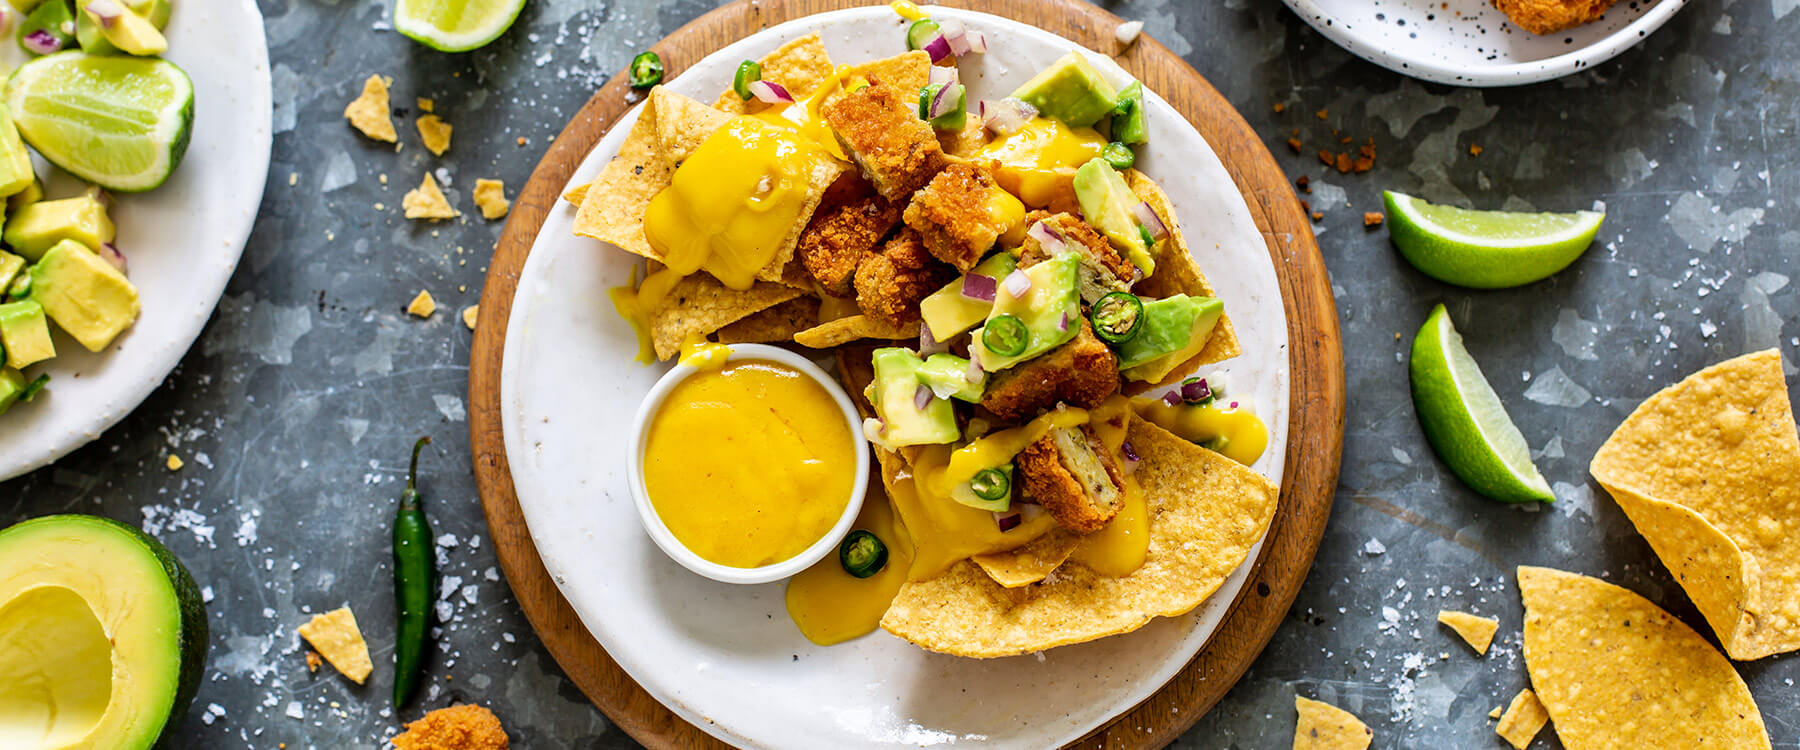 Cheesy vegan nachos topped with nuggets and salsa 2019